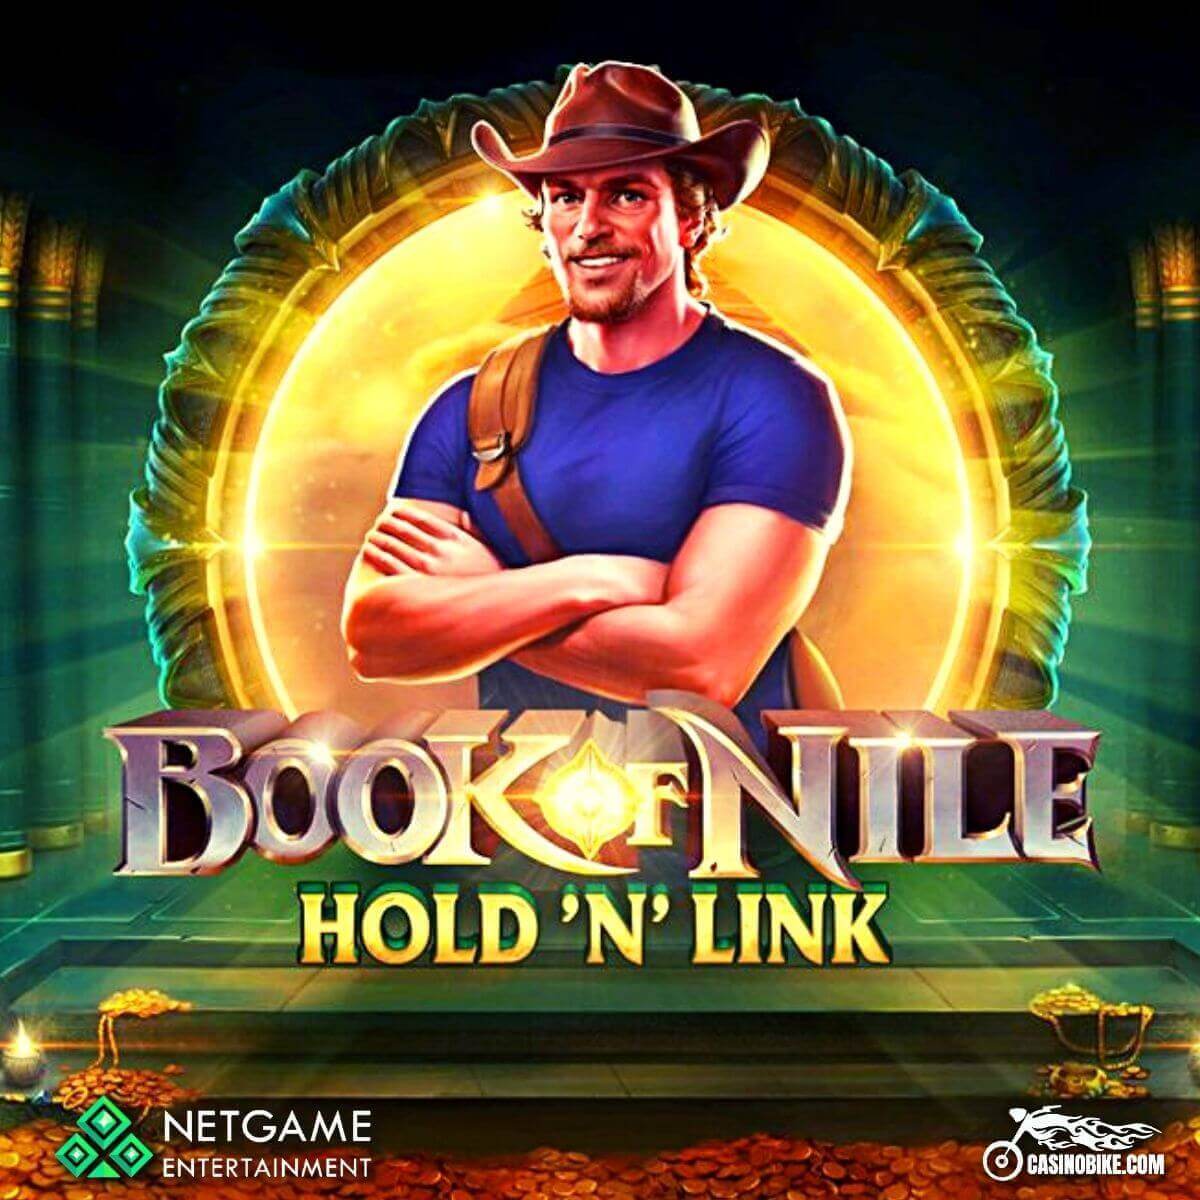 Book of Nile Hold 'n' Link Slot by NetGame Entertainment